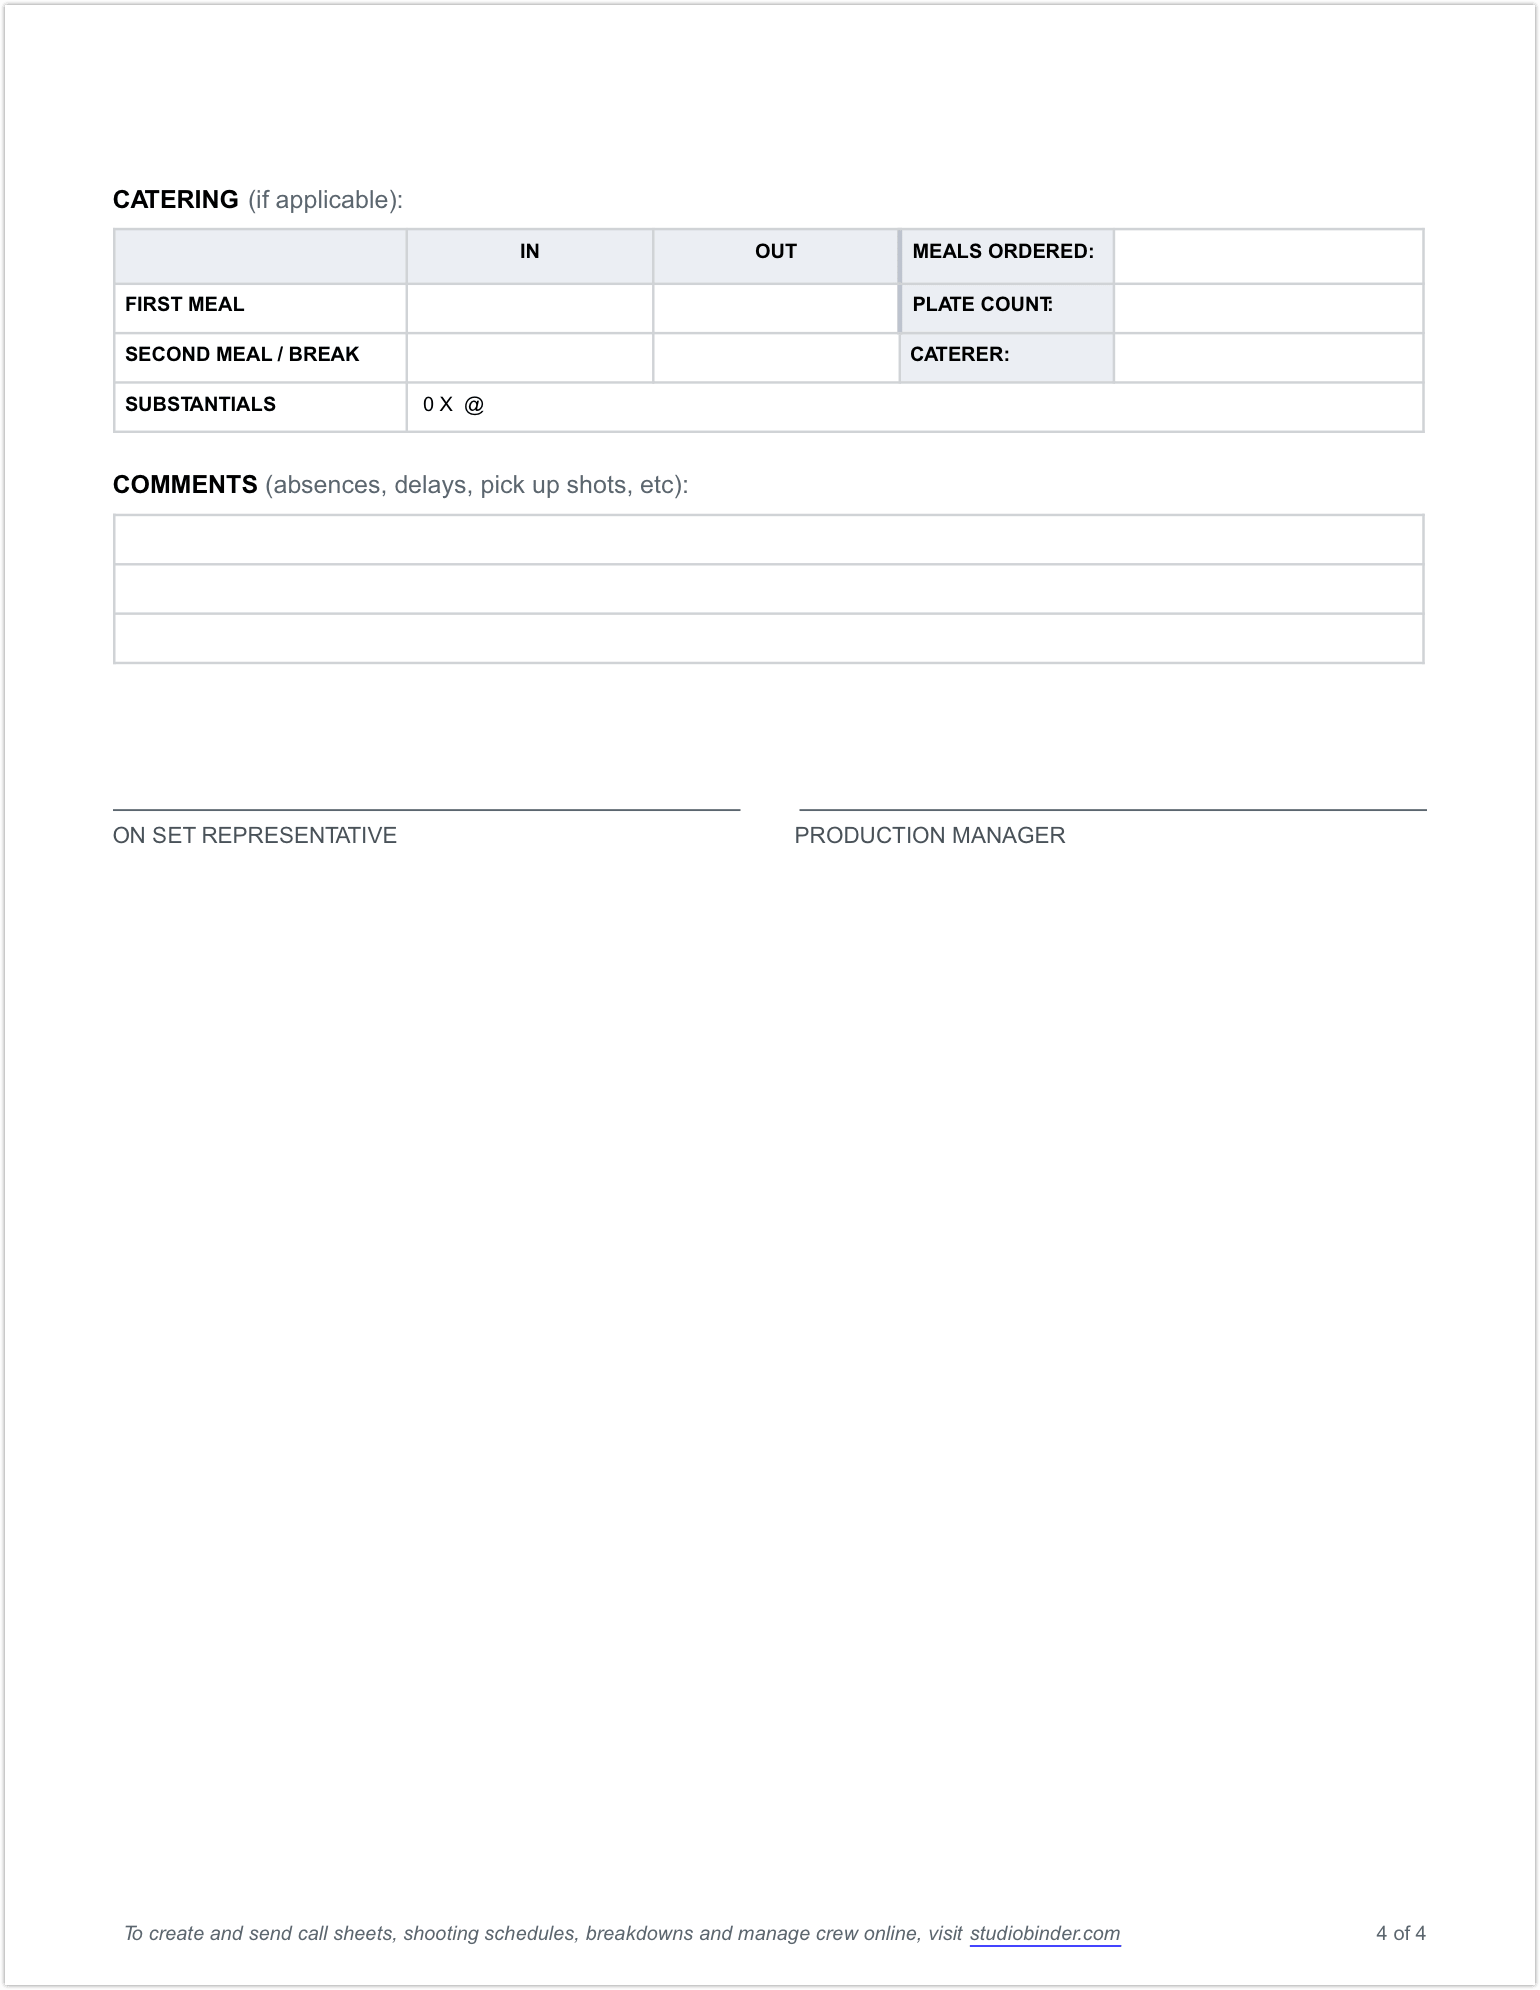 Daily Production Report Template - Page 4 - StudioBinder